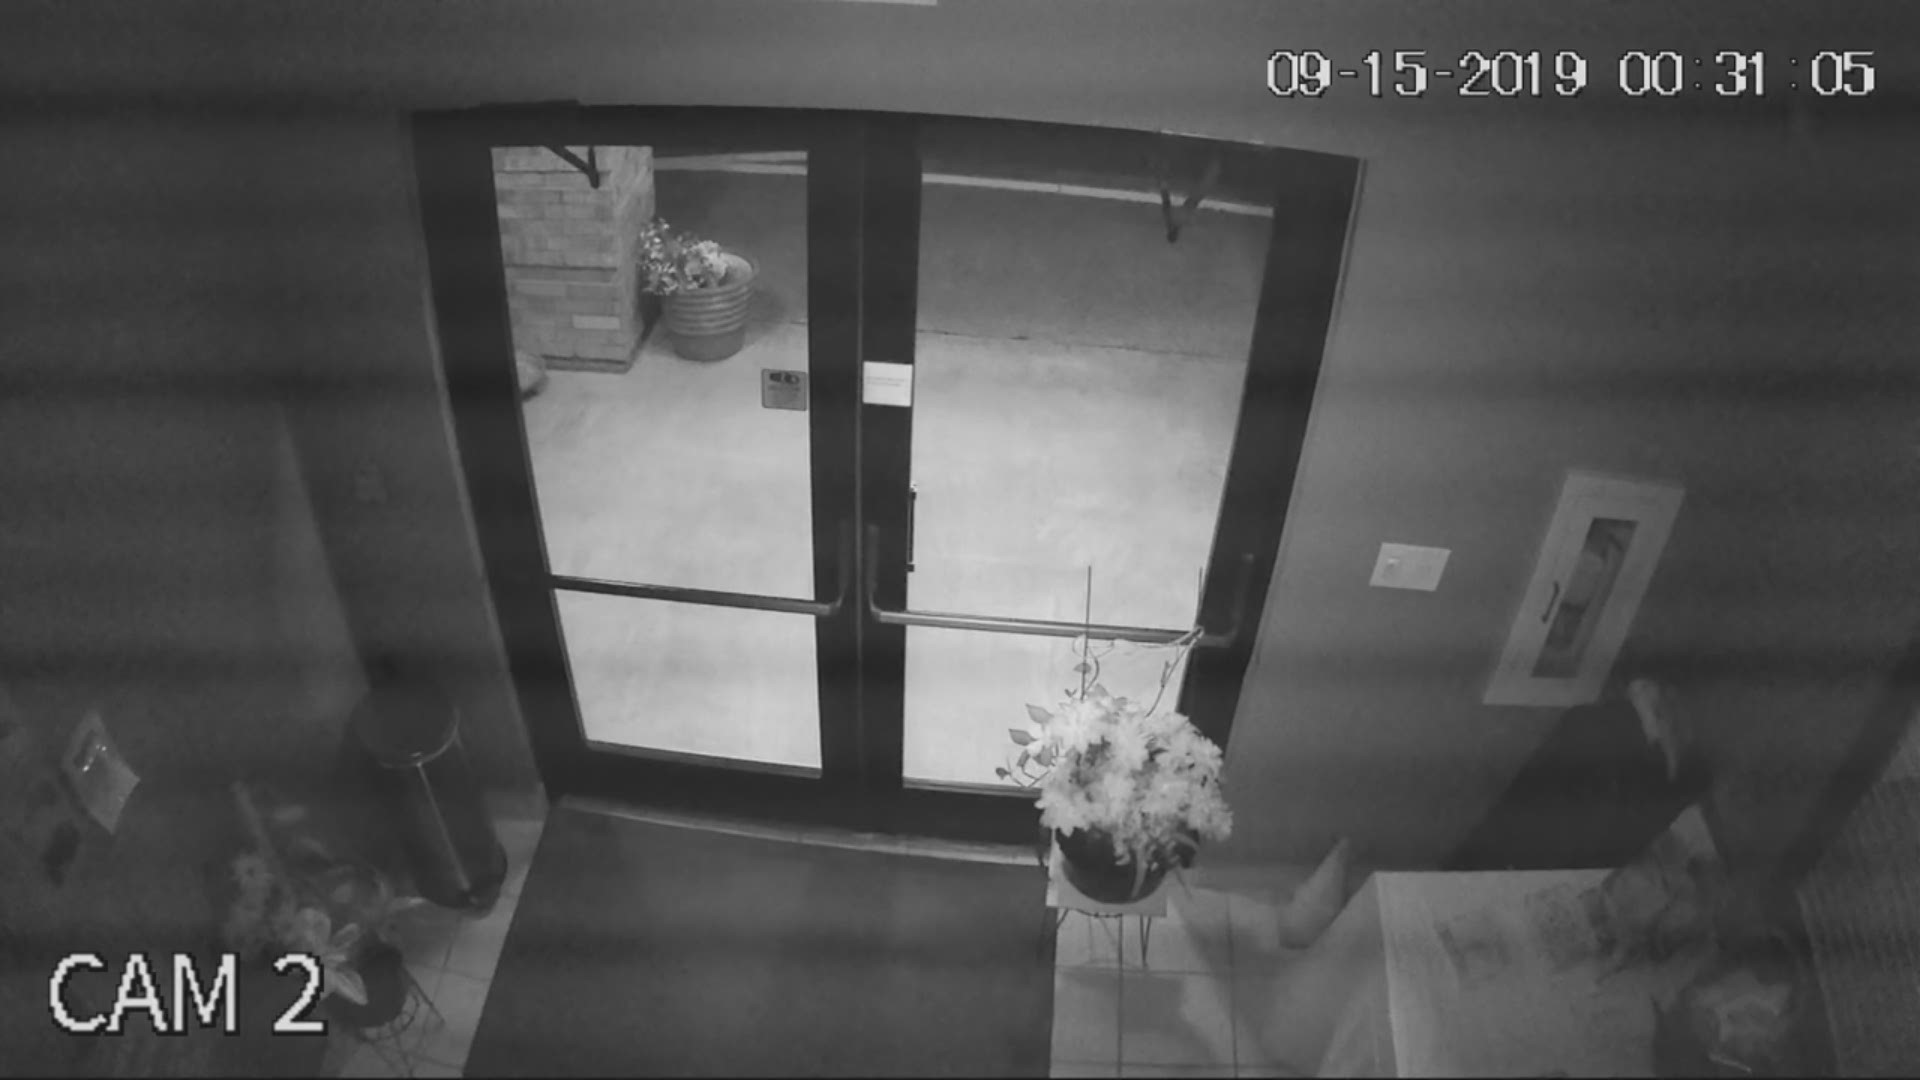 Dallas police are asking for the public's help in identifying a suspect they believe is connected to the recent vandalism of several churches in Oak Cliff.